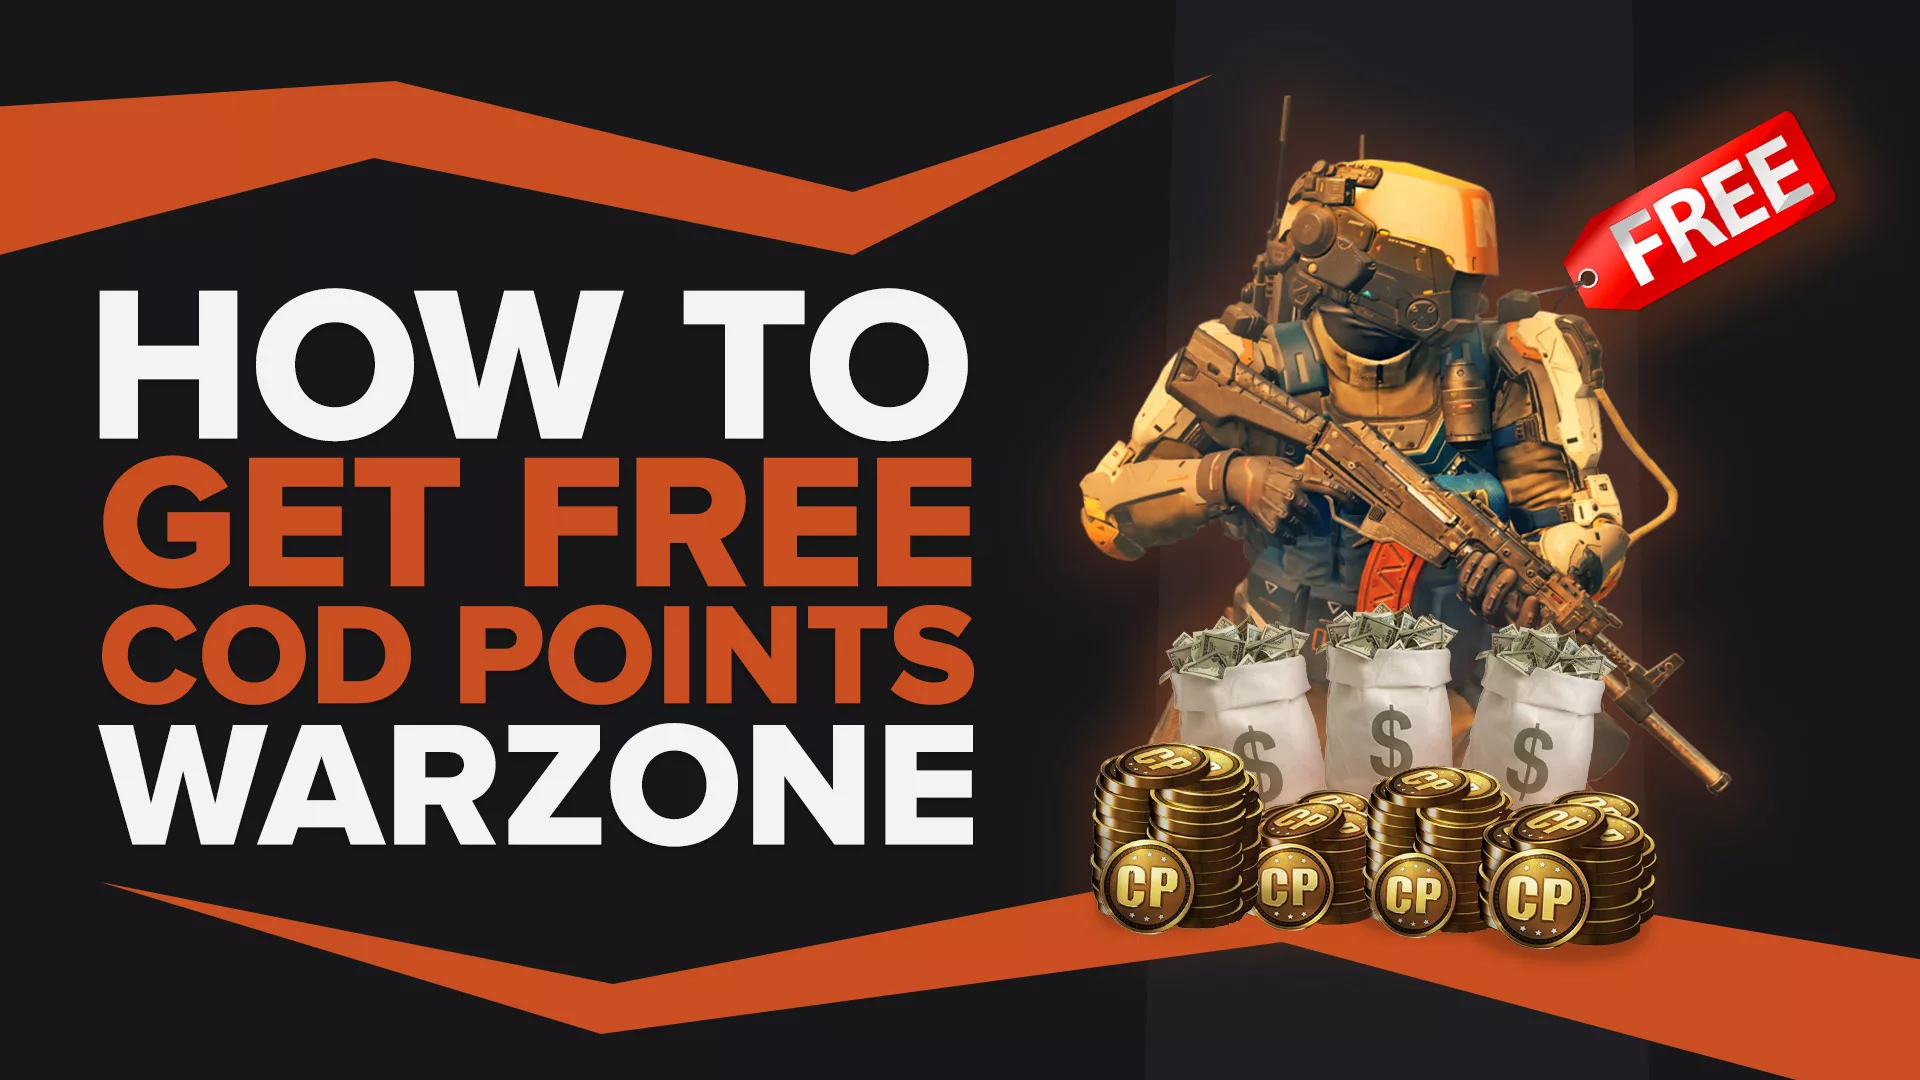 How to Get Free Cod Points for Warzone